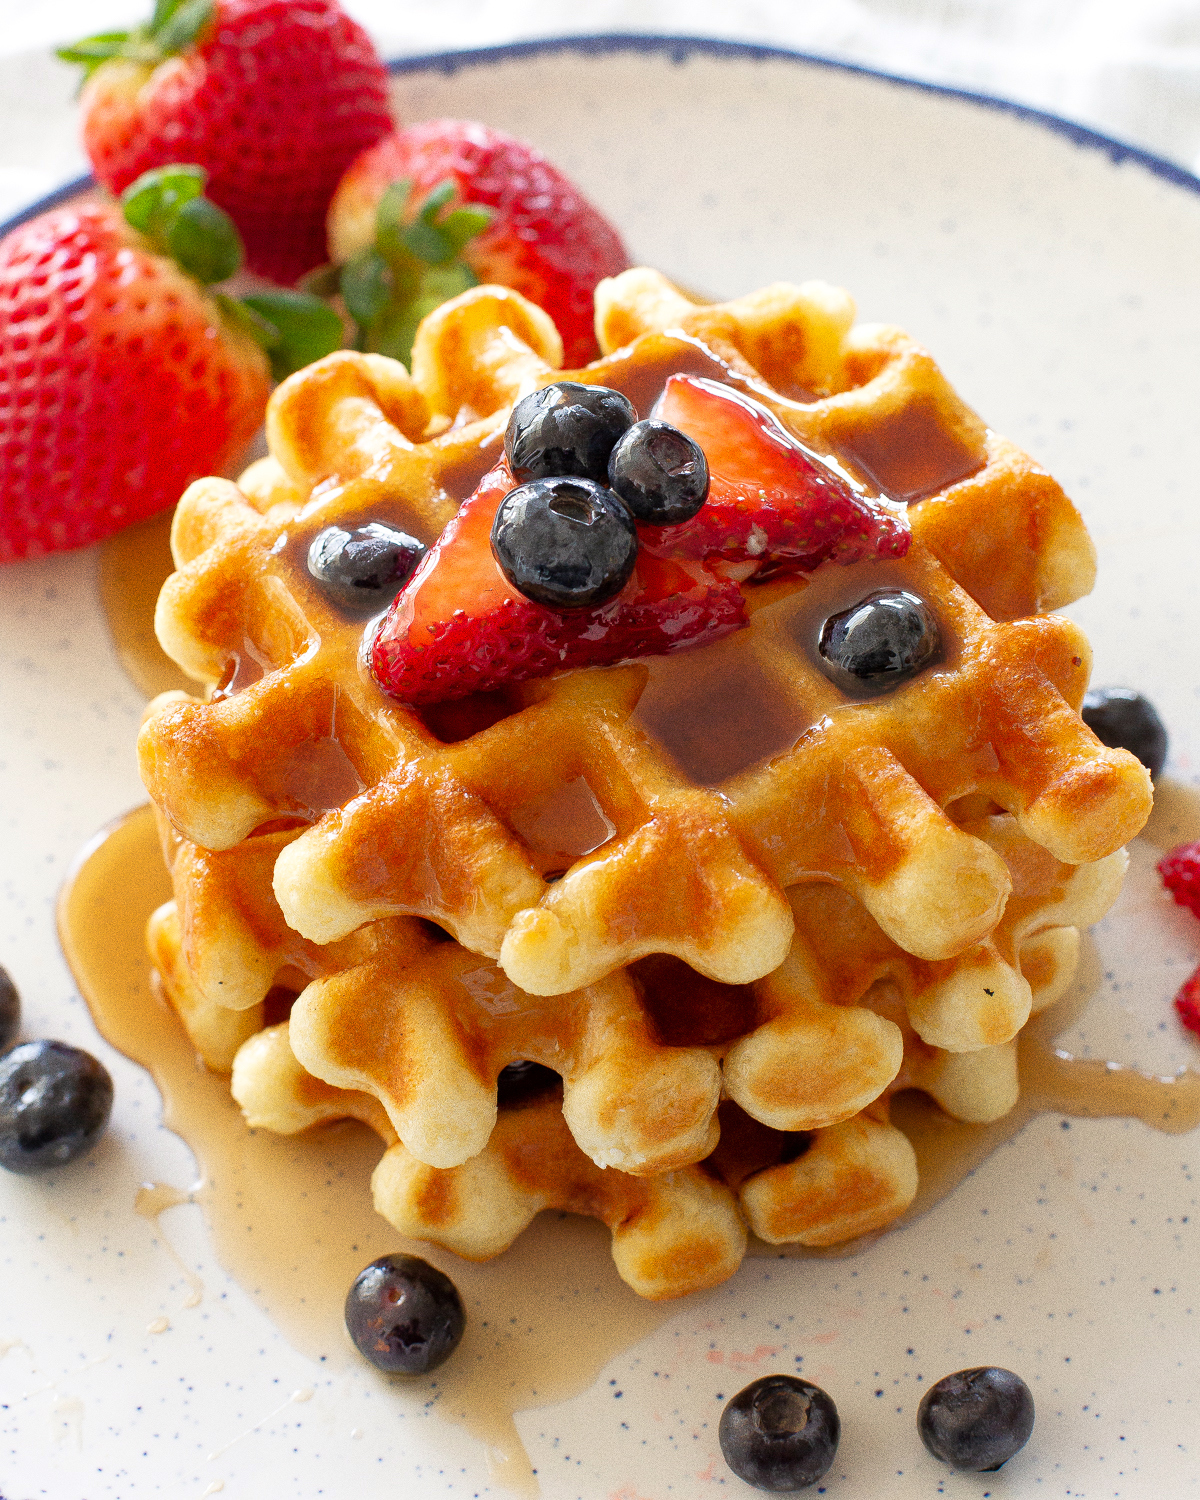 stack of waffles with strawberries and blueberries